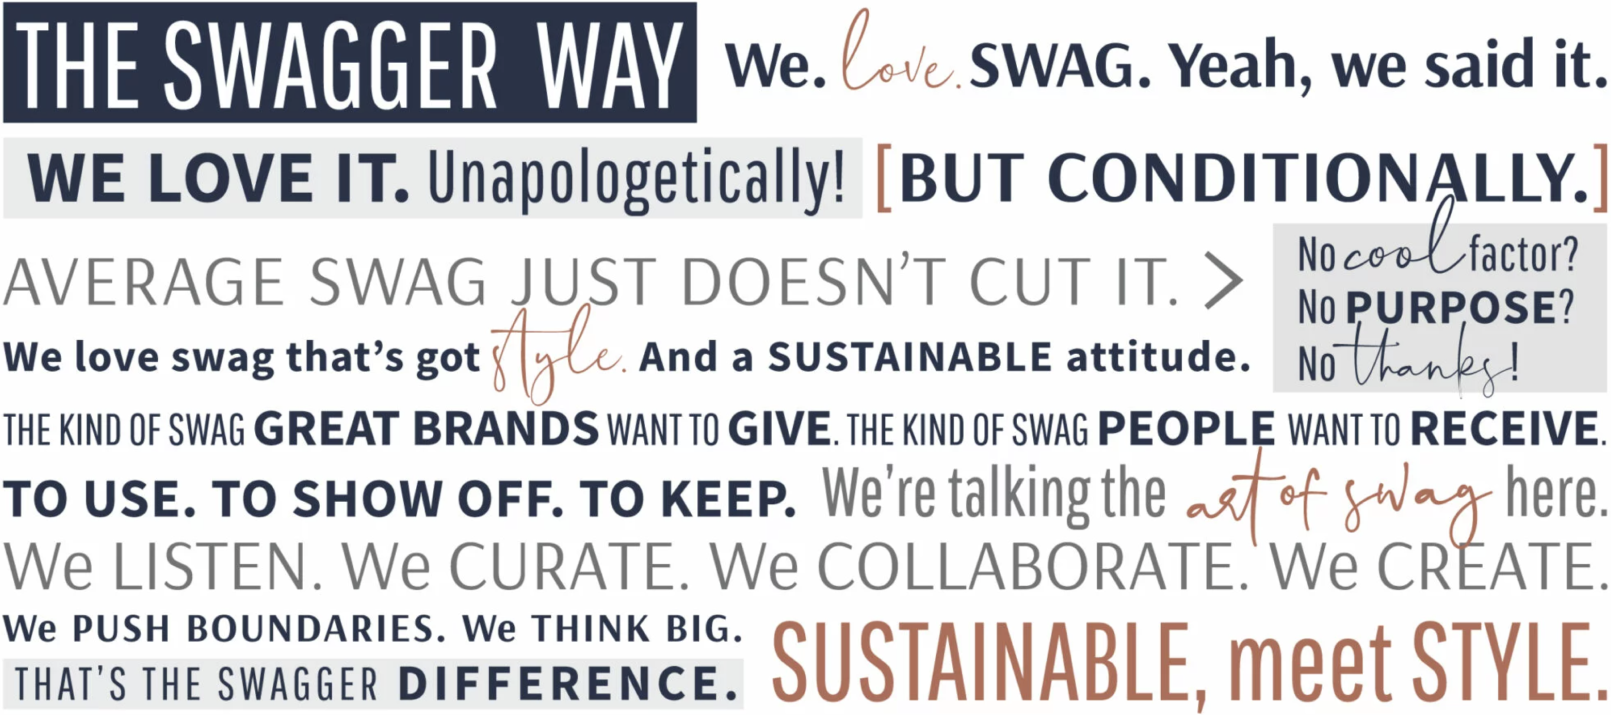 Swagger Manifesto: THE SWAGGER WAY. We love swag. Yeah, we said it. We love it. Unapologetically! But conditionally. Average swag just doesn't cut it. No cool factor. No purpose. No thanks! We love swag that's got style. And a sustainable attitude. The kind of swag great brands want to give. The kind of swag people want to receive. To use. To show off. To keep. We're talking the art of swag here. We listen. We curate. We collaborate. We create. We push boundaries. We think big. That's the Swagger different. Sustainable, meet Style.